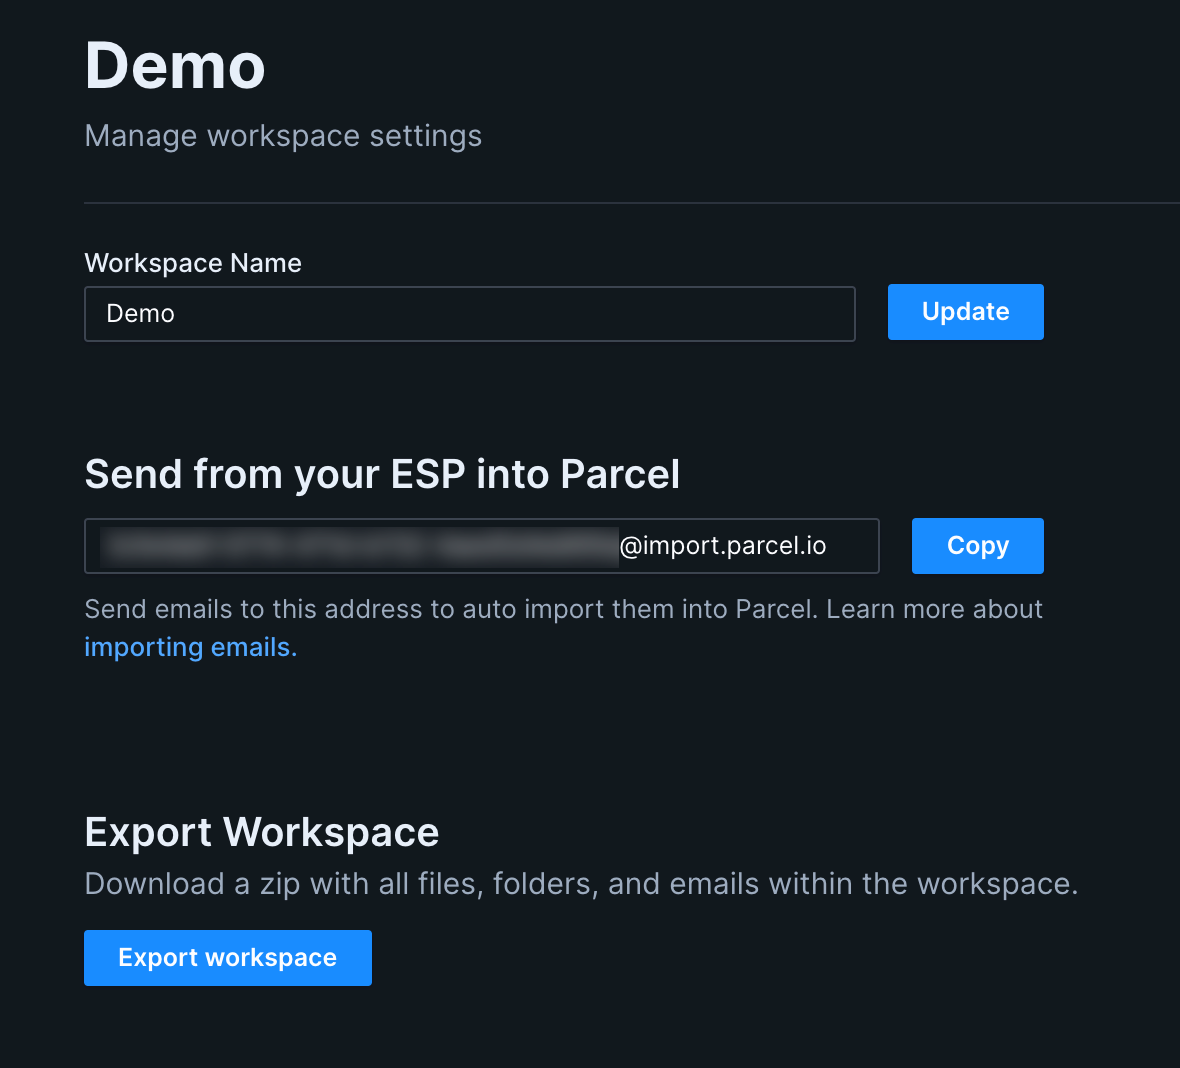 Screenshot showing the export workspace button